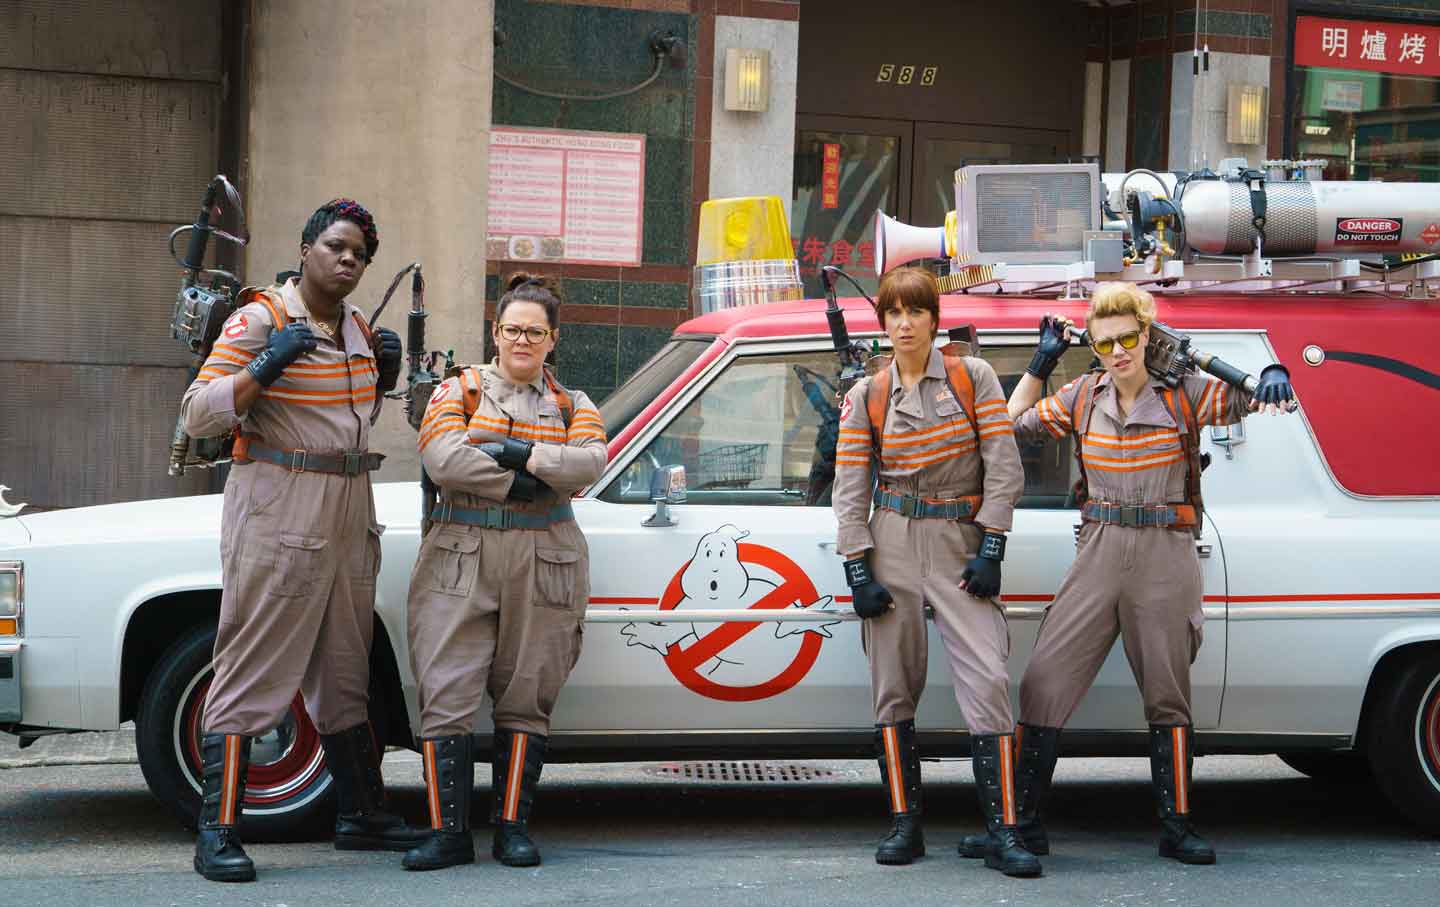 The ‘Ghostbusters’ Trolls Were Right